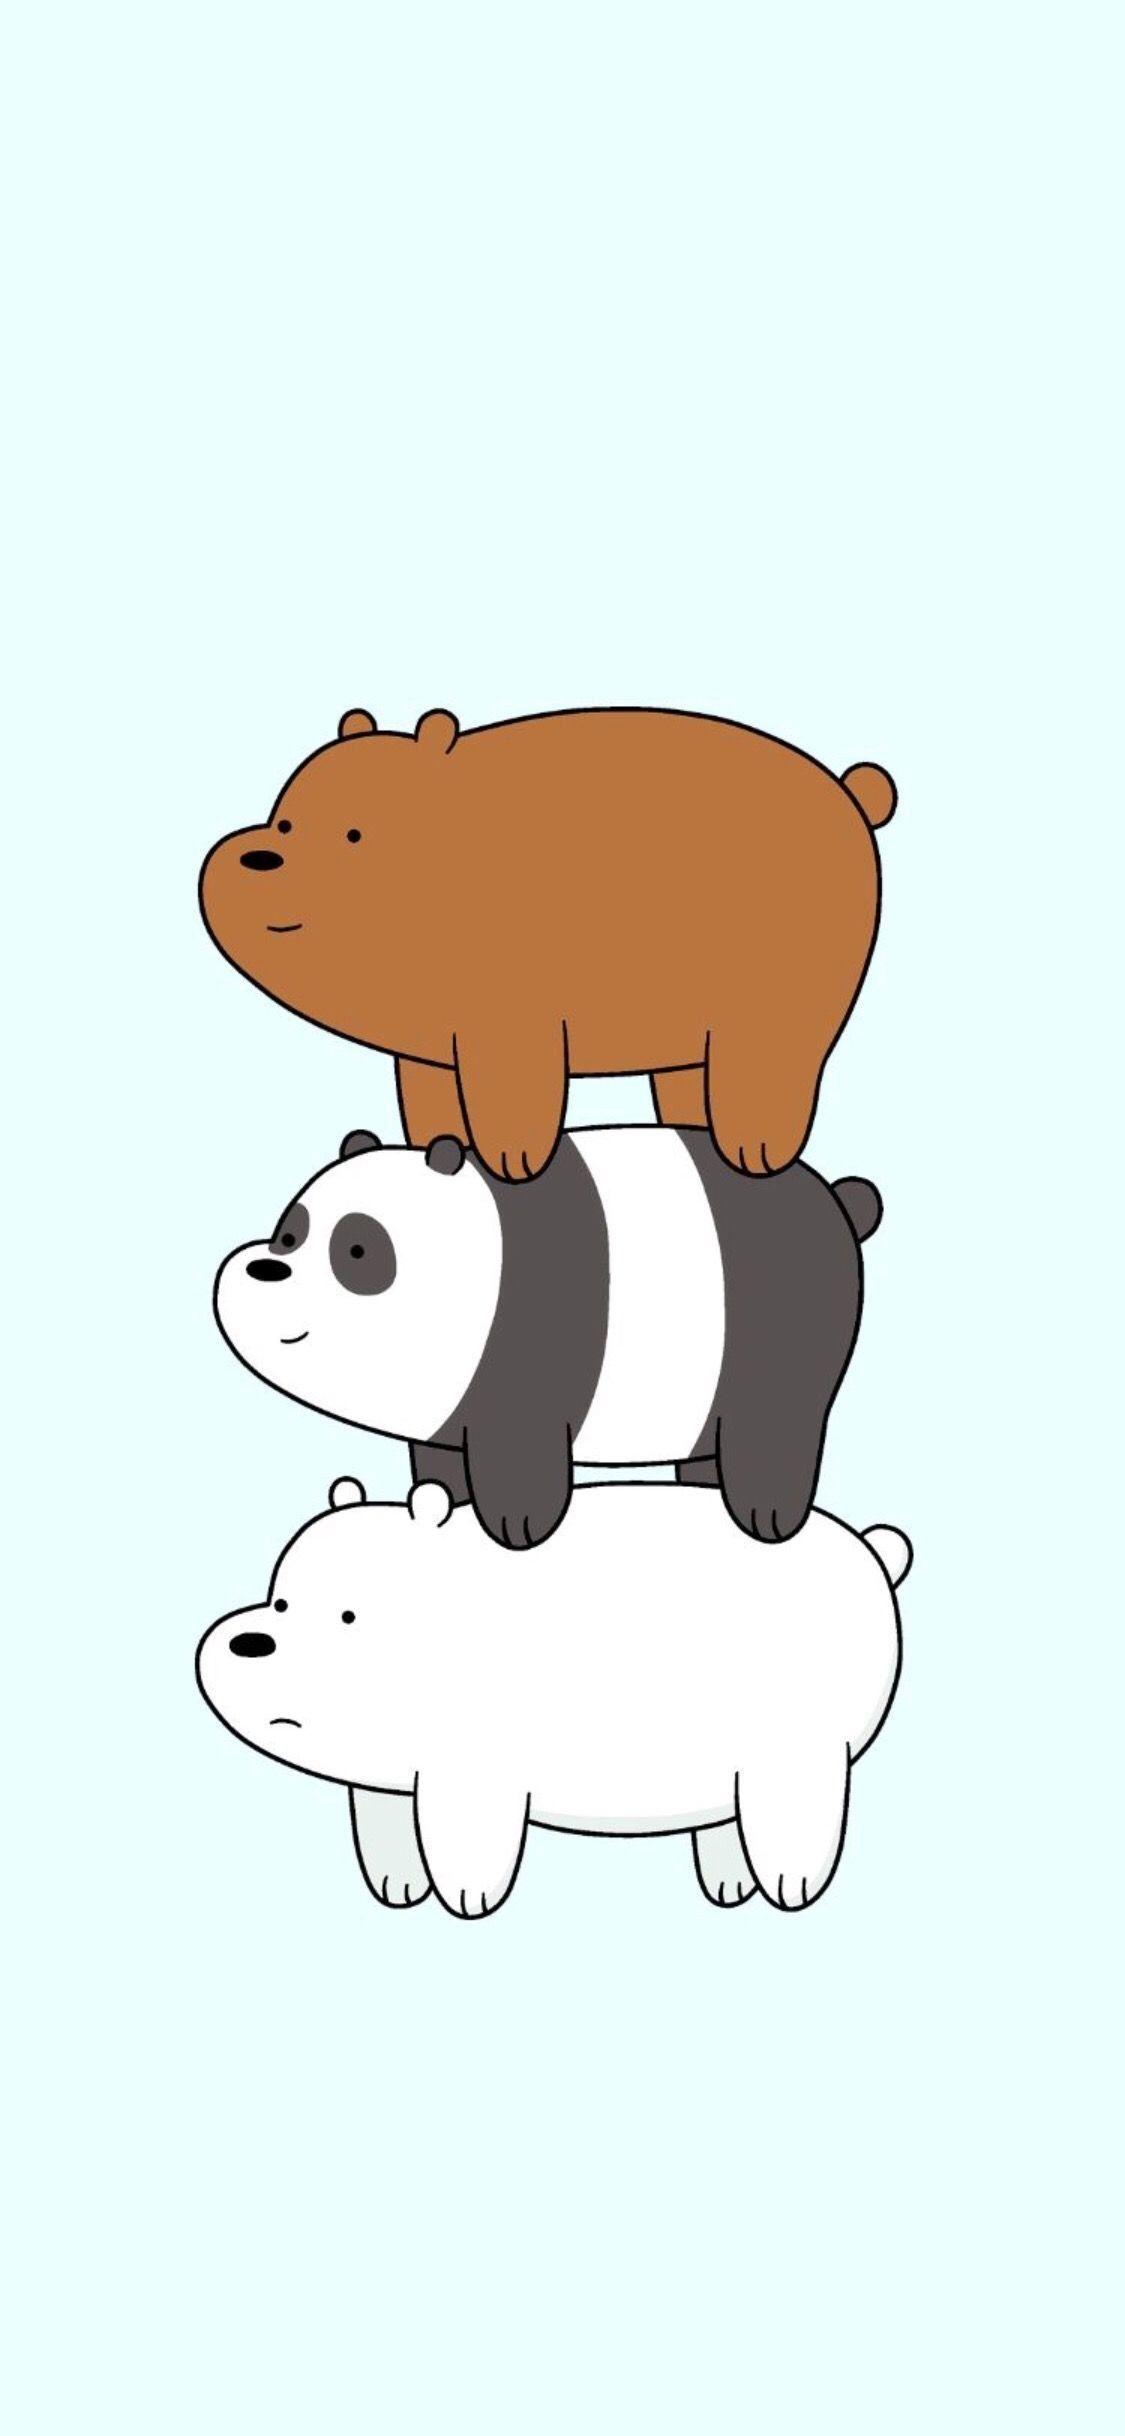 We Bare Bears for iPhone X â˜†. We bare